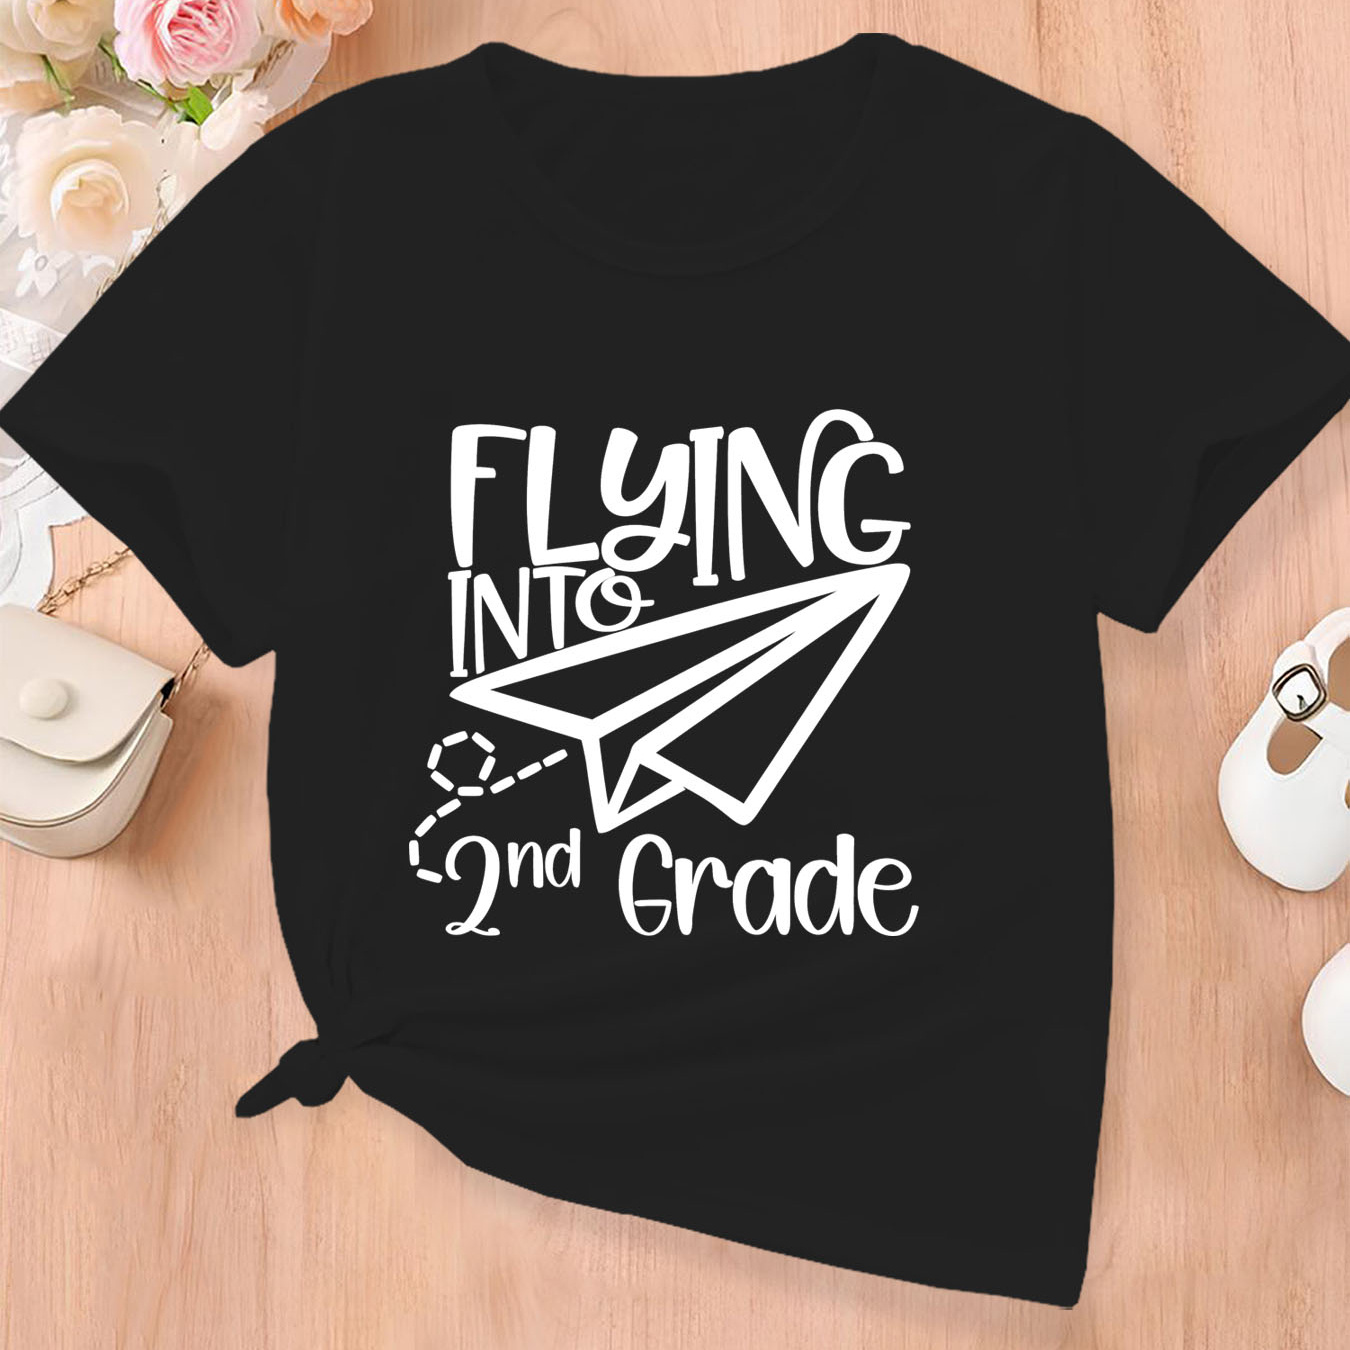 

flying Into 2nd Grade" Letter & Graphic Print Creative T-shirts, Soft & Elastic Comfy Crew Neck Short Sleeve Tee, Girls' Summer Tops